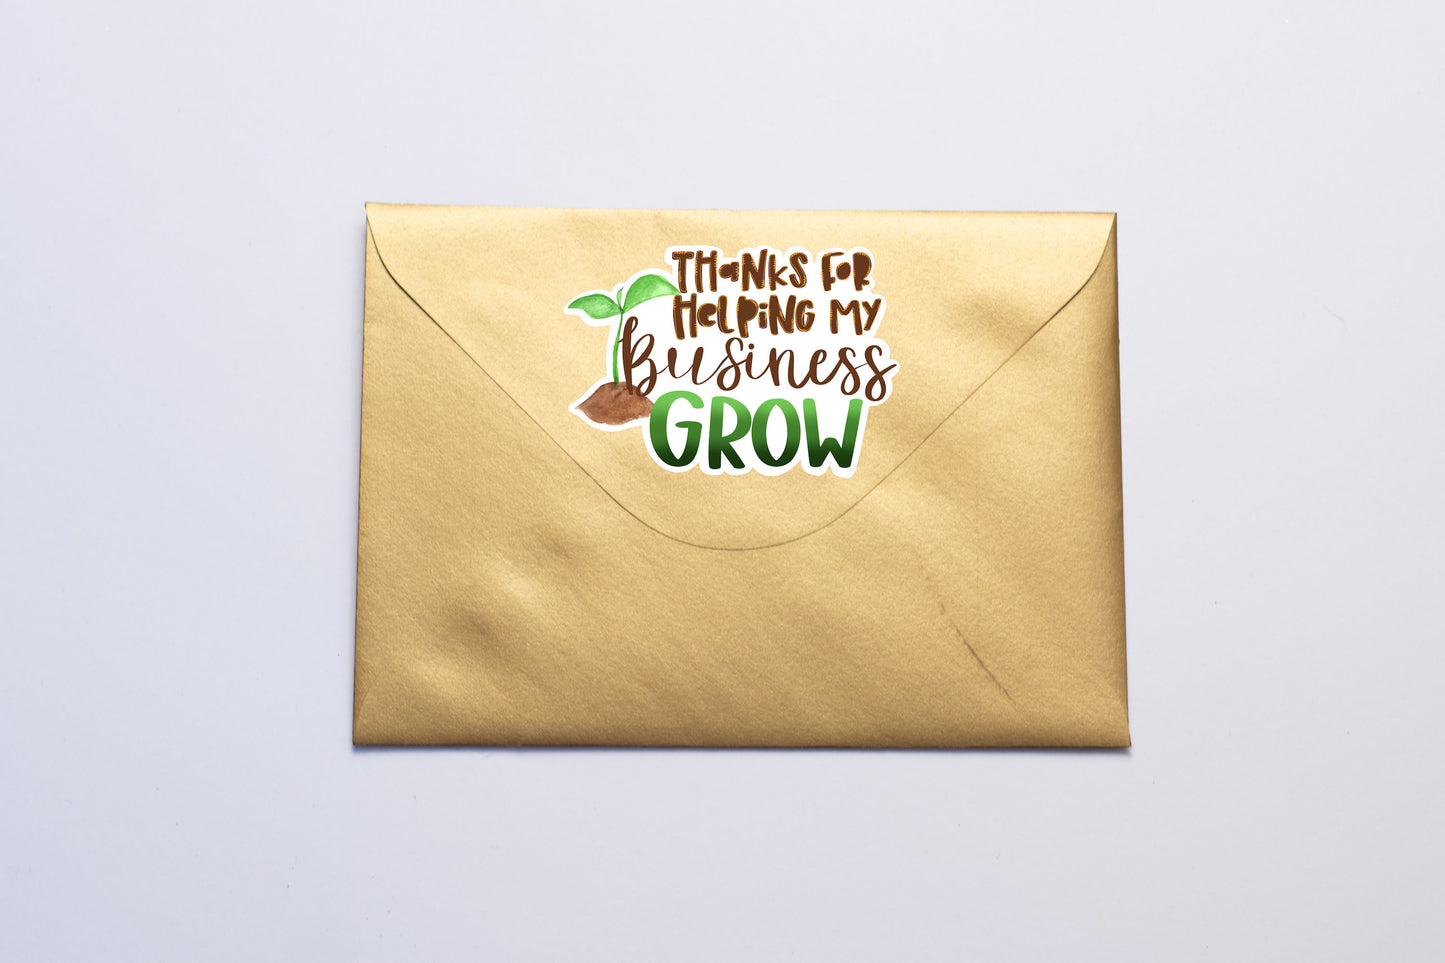 Thank You For Helping My Business Grow | Printable Sticker